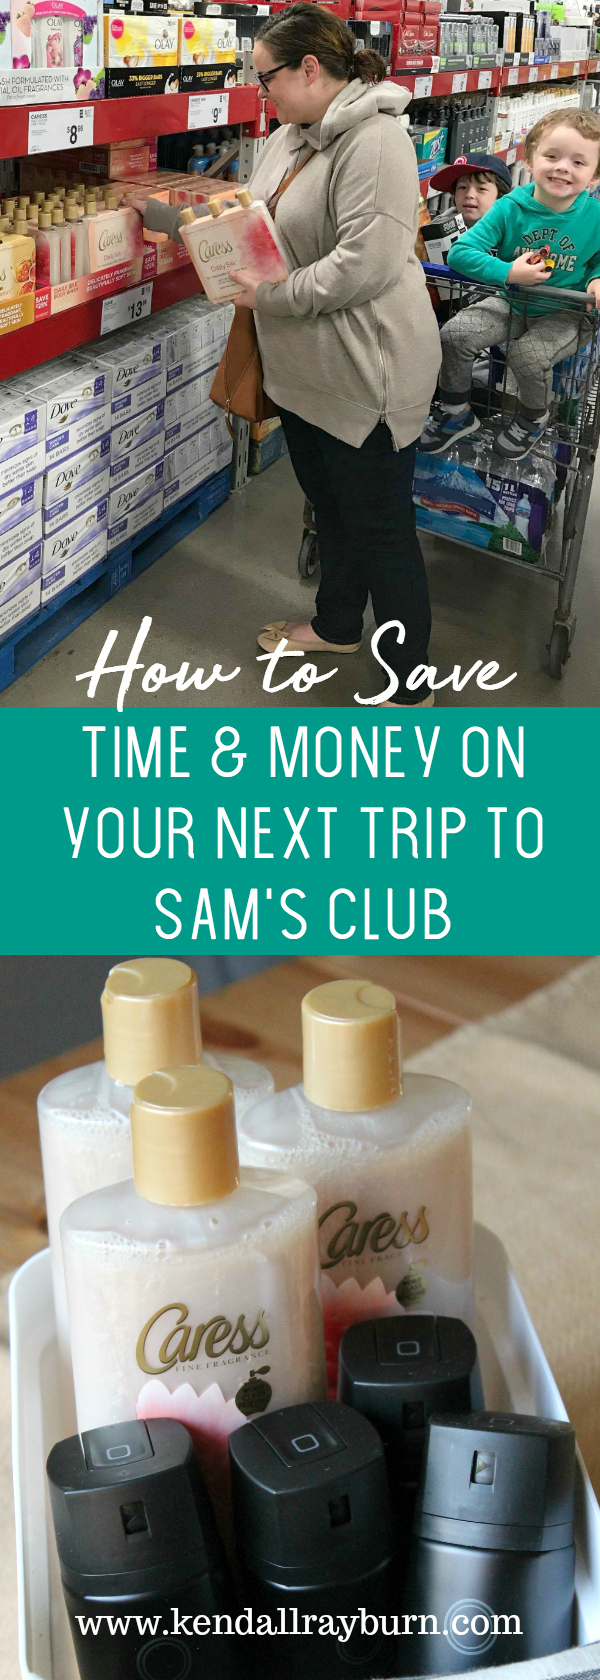 How to Save Time & Money on Your Next Trip to Sam's Club